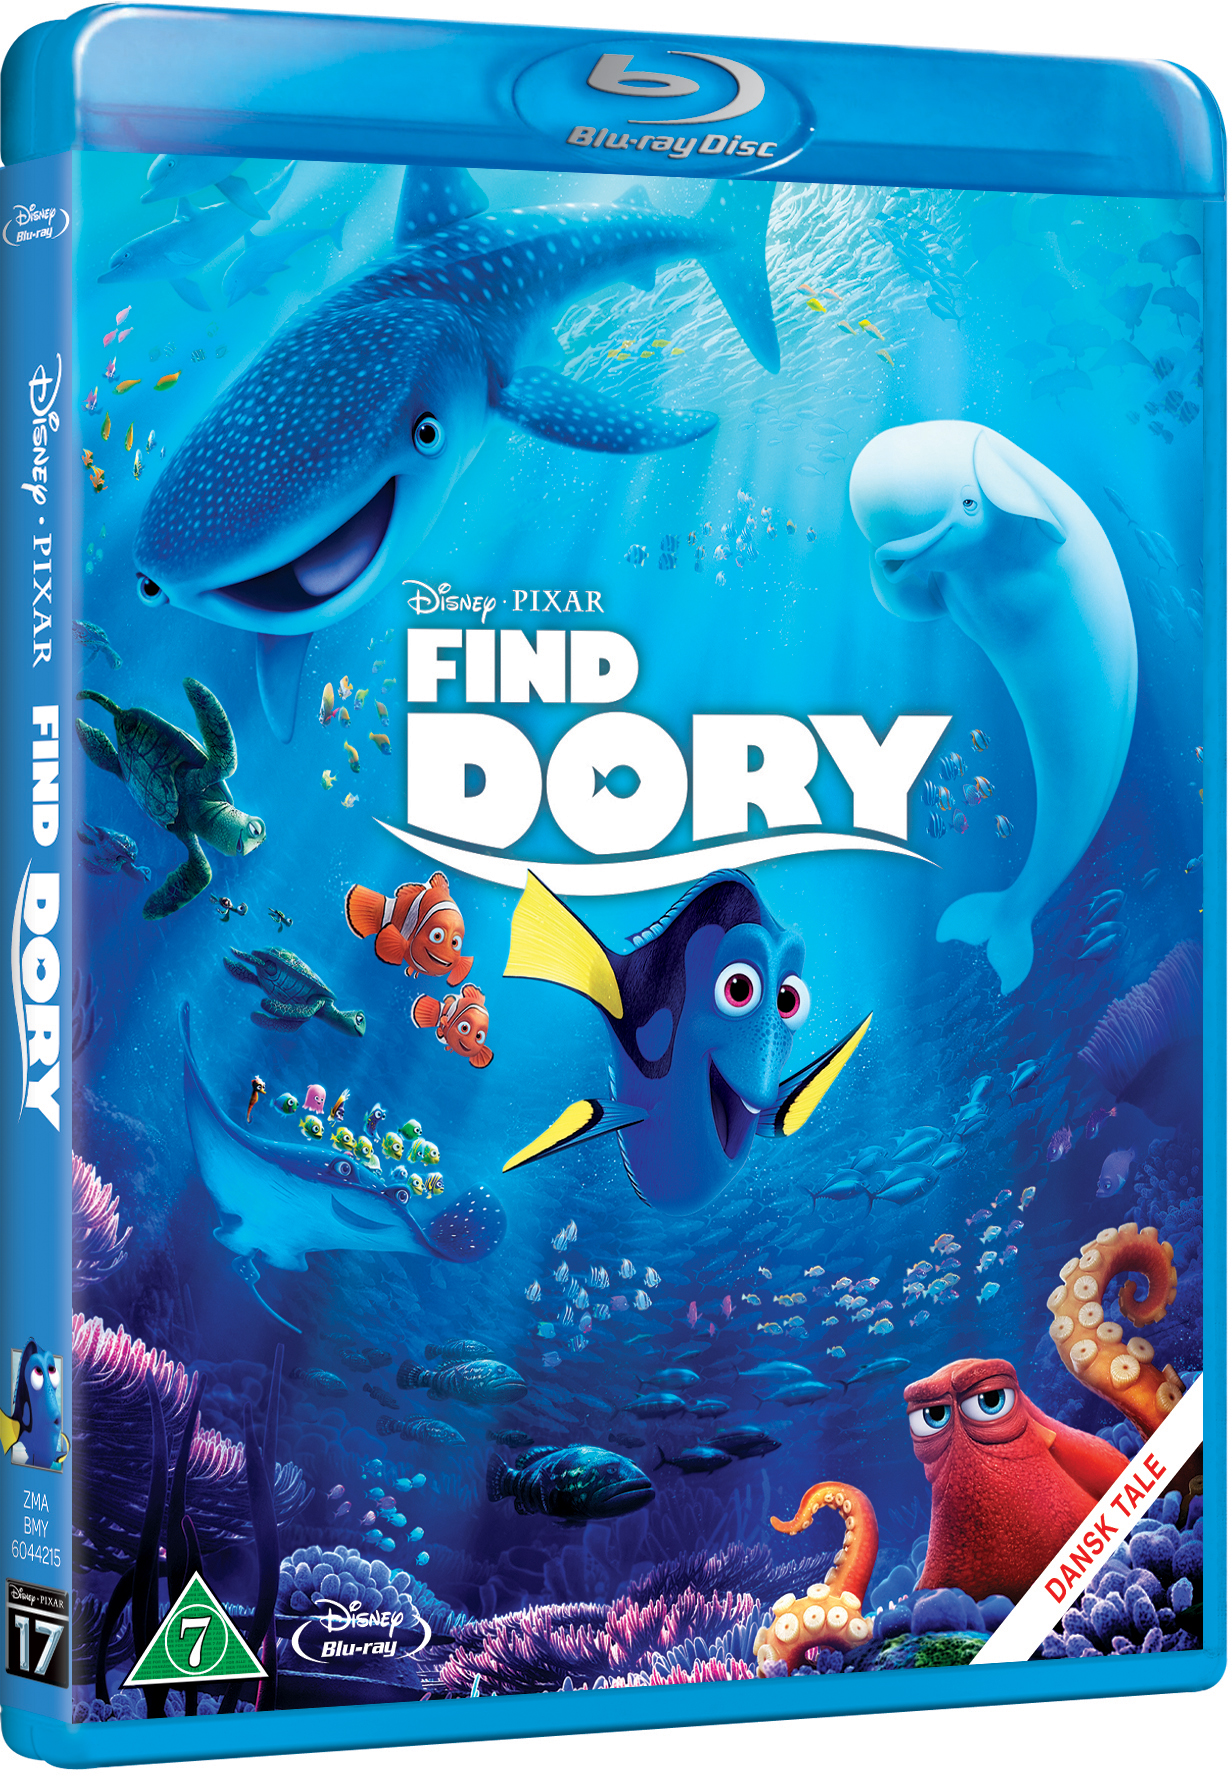 Disneys Finding Dory/Find Dory (Blu-Ray)